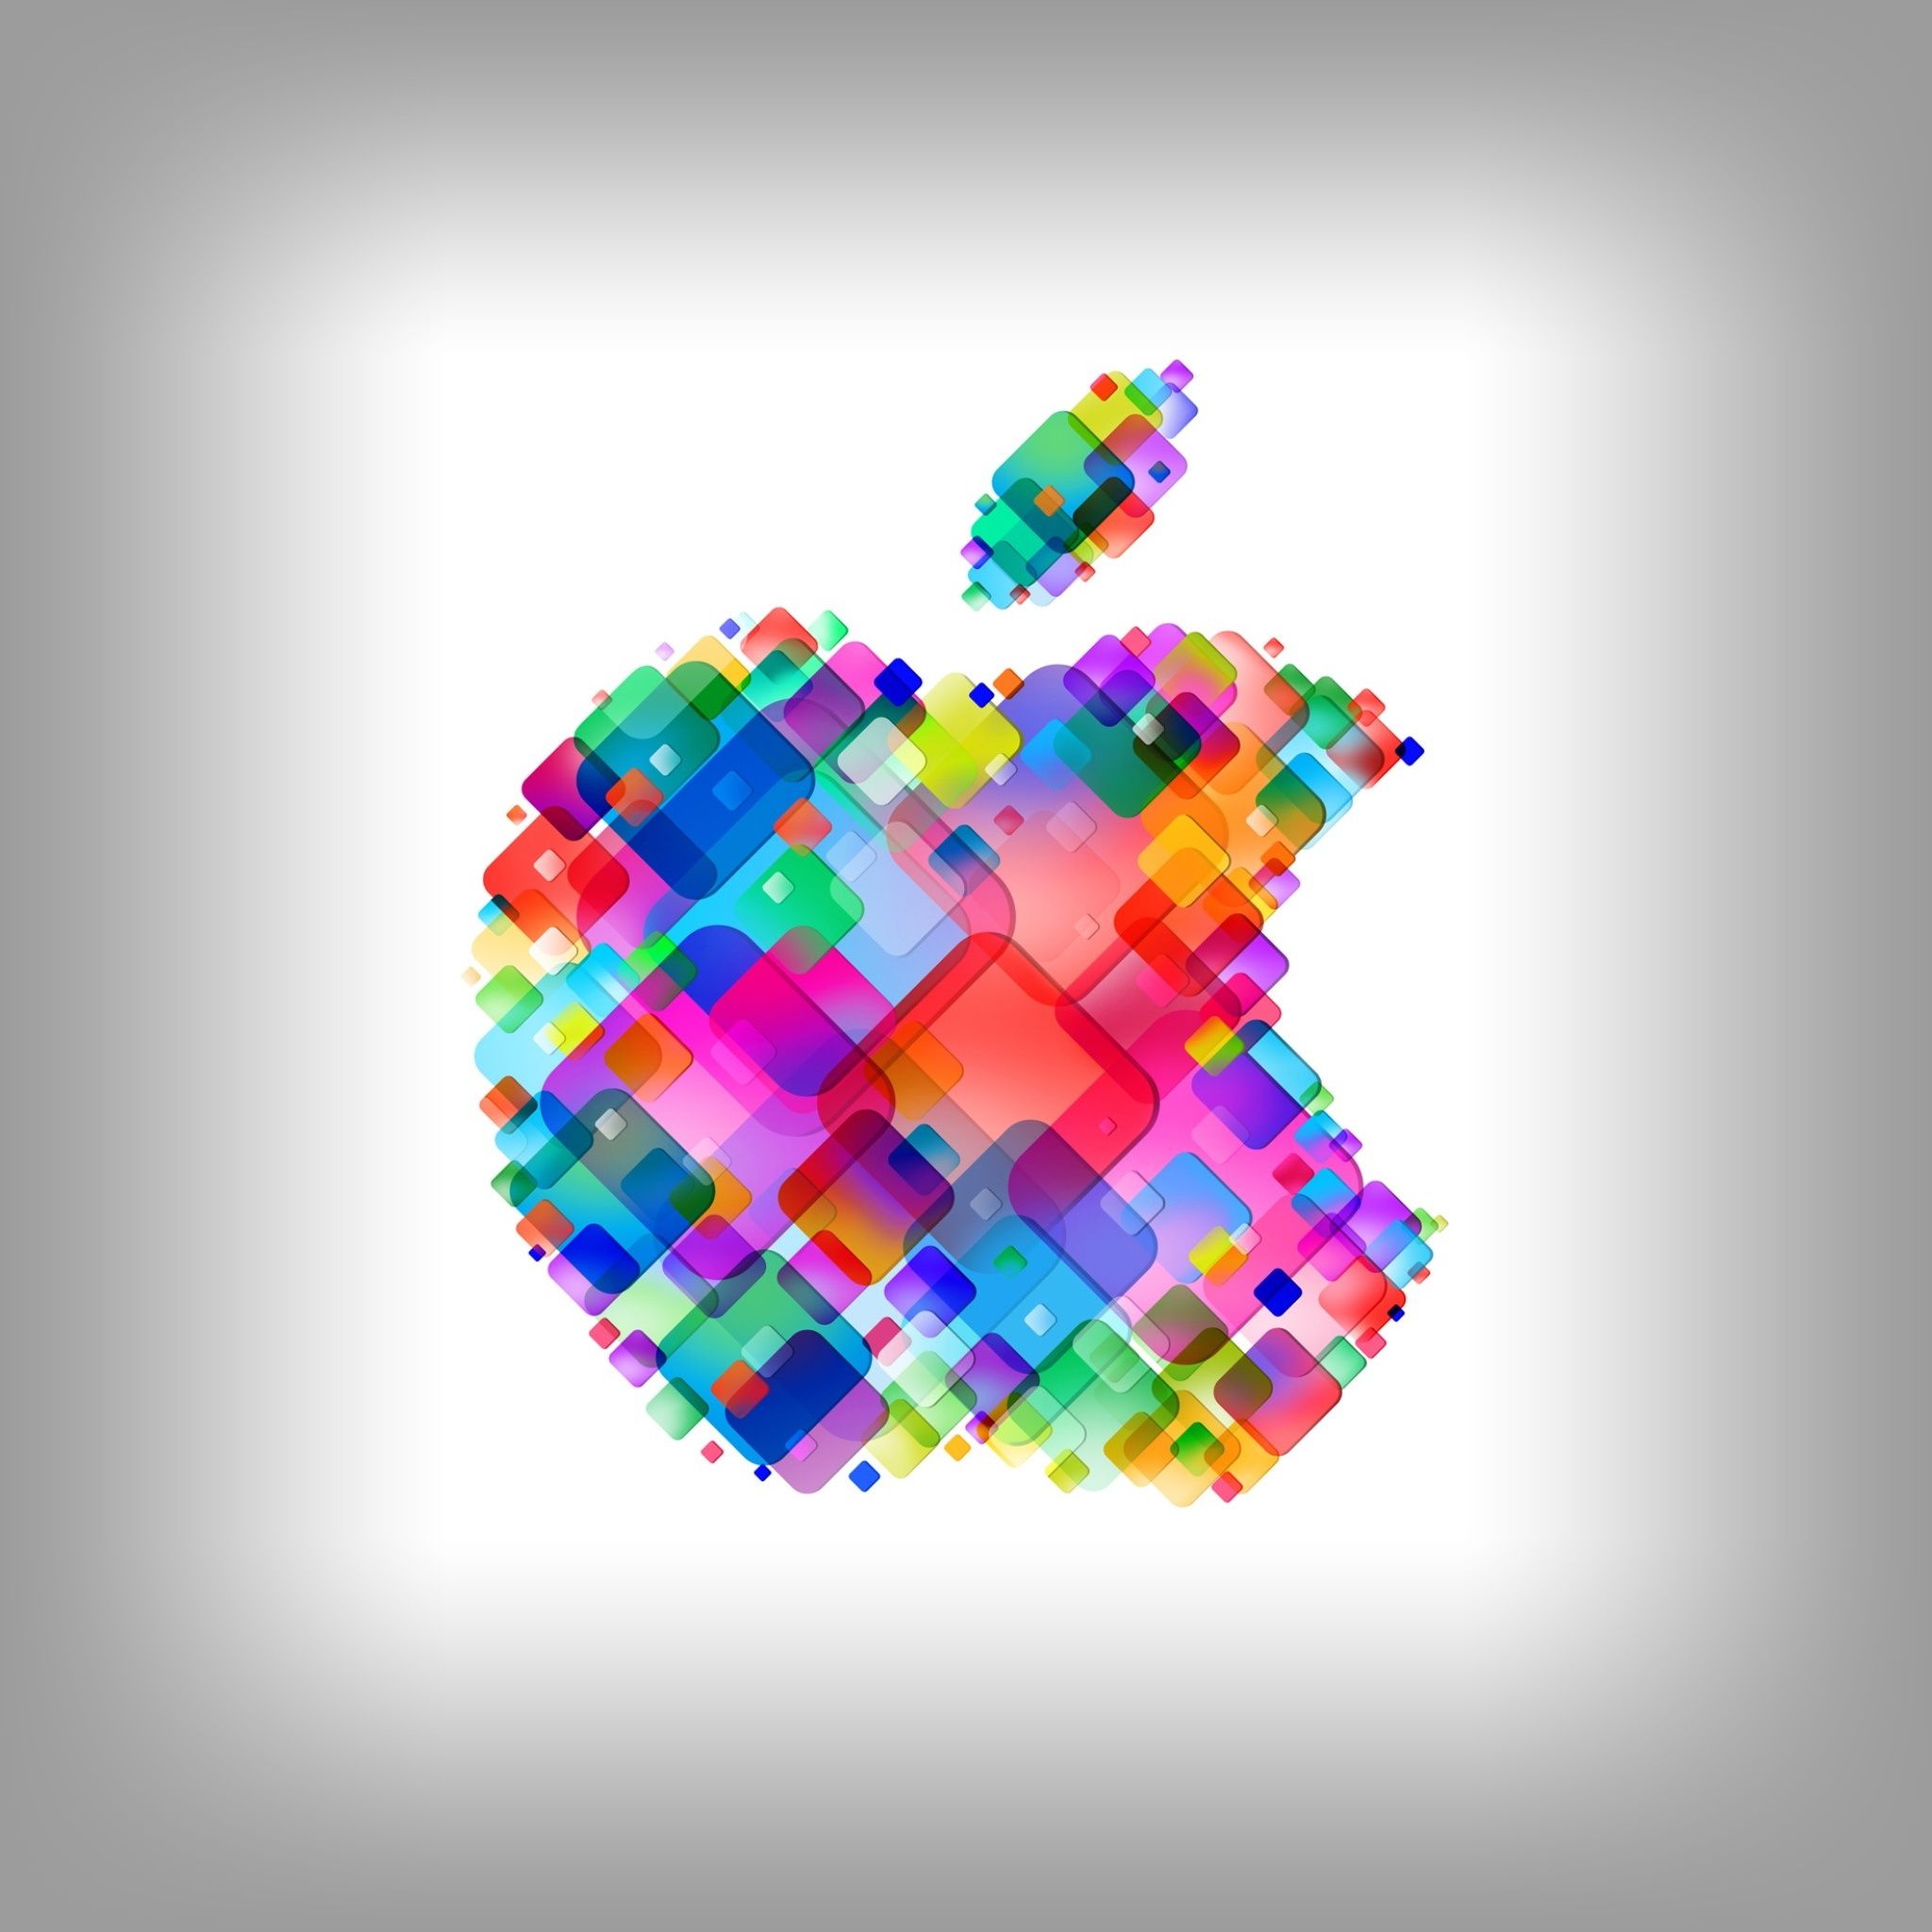 Most Popular Hd Wallpapers For Your Ipad Free Download Techbeasts Ipad タブレット壁紙ギャラリー